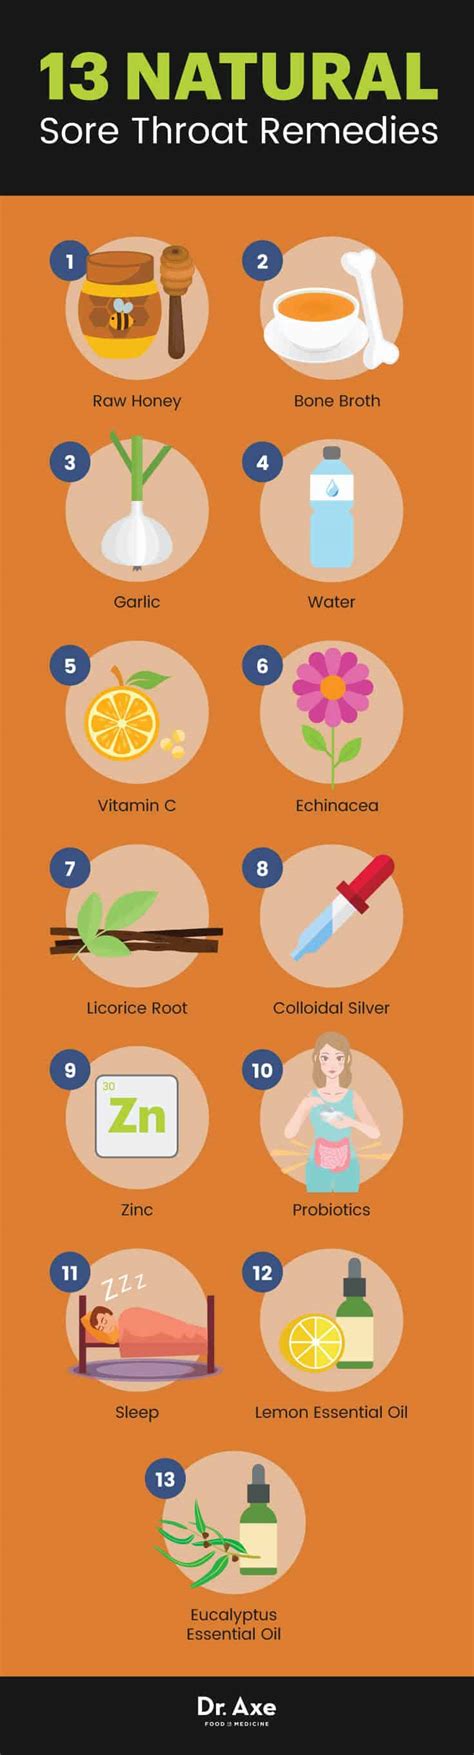 13 Natural Sore Throat Remedies For Fast Relief Dr Axe